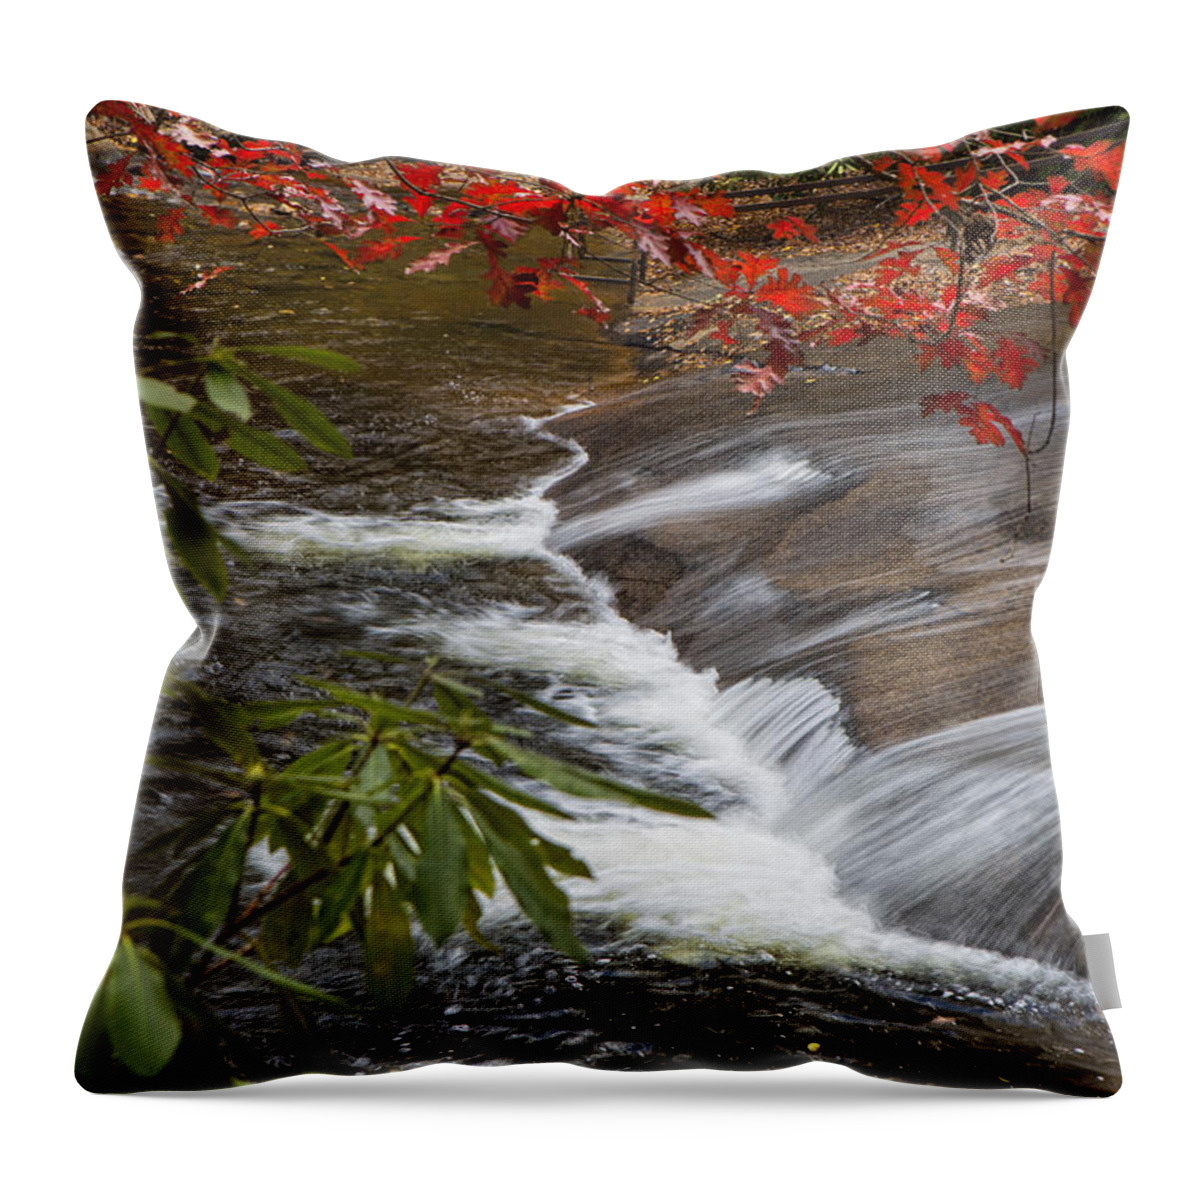 Waterfalls Throw Pillow featuring the photograph Red Leaf Falls by Ken Barrett